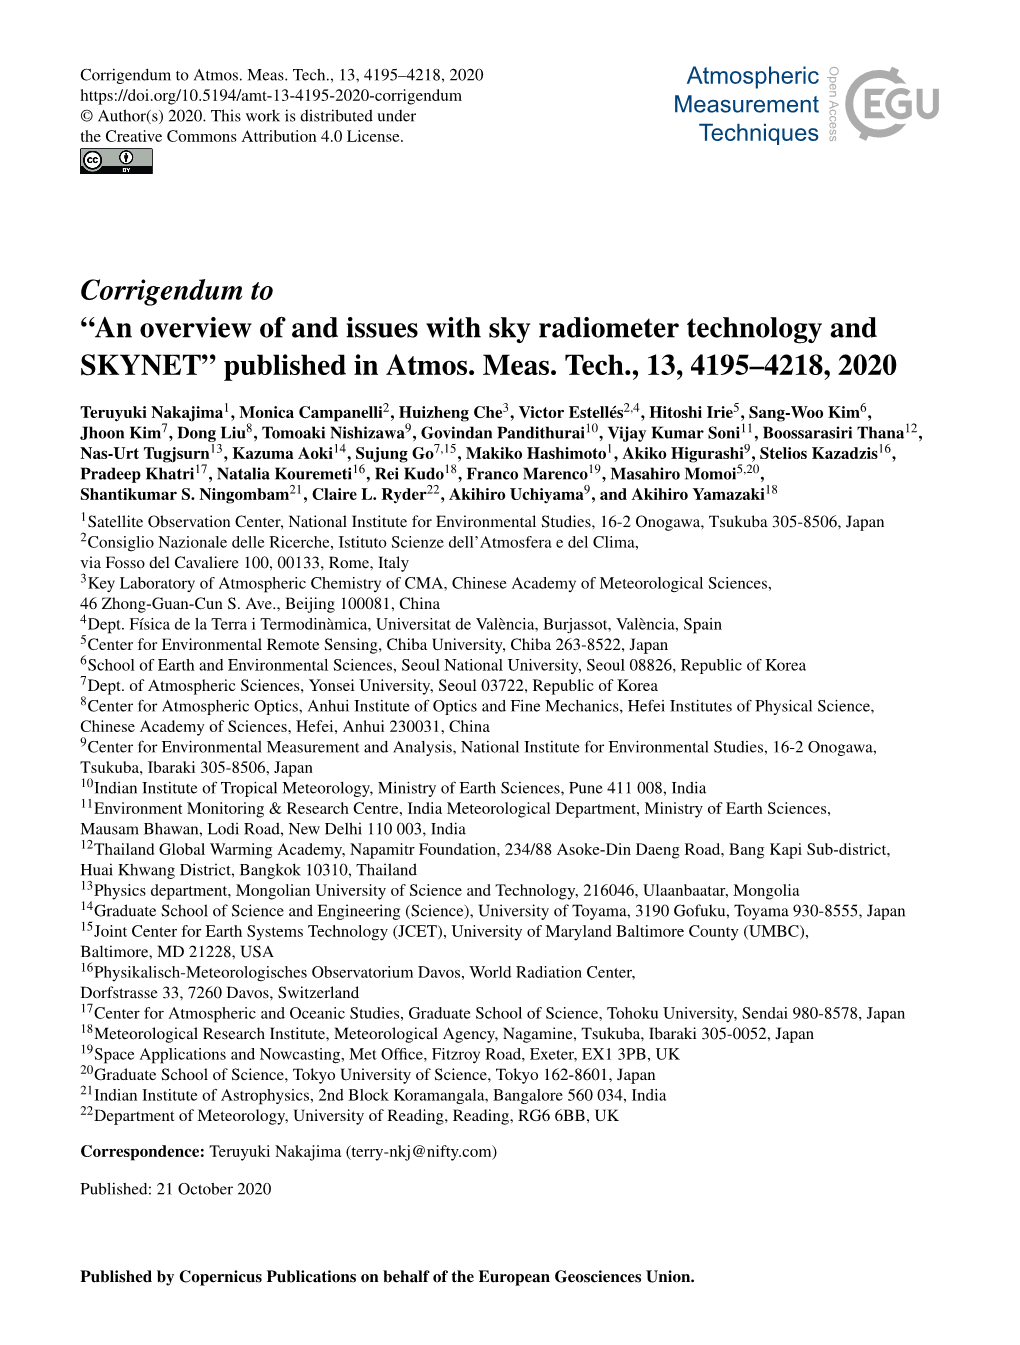 Corrigendum to “An Overview of and Issues with Sky Radiometer Technology and SKYNET” Published in Atmos